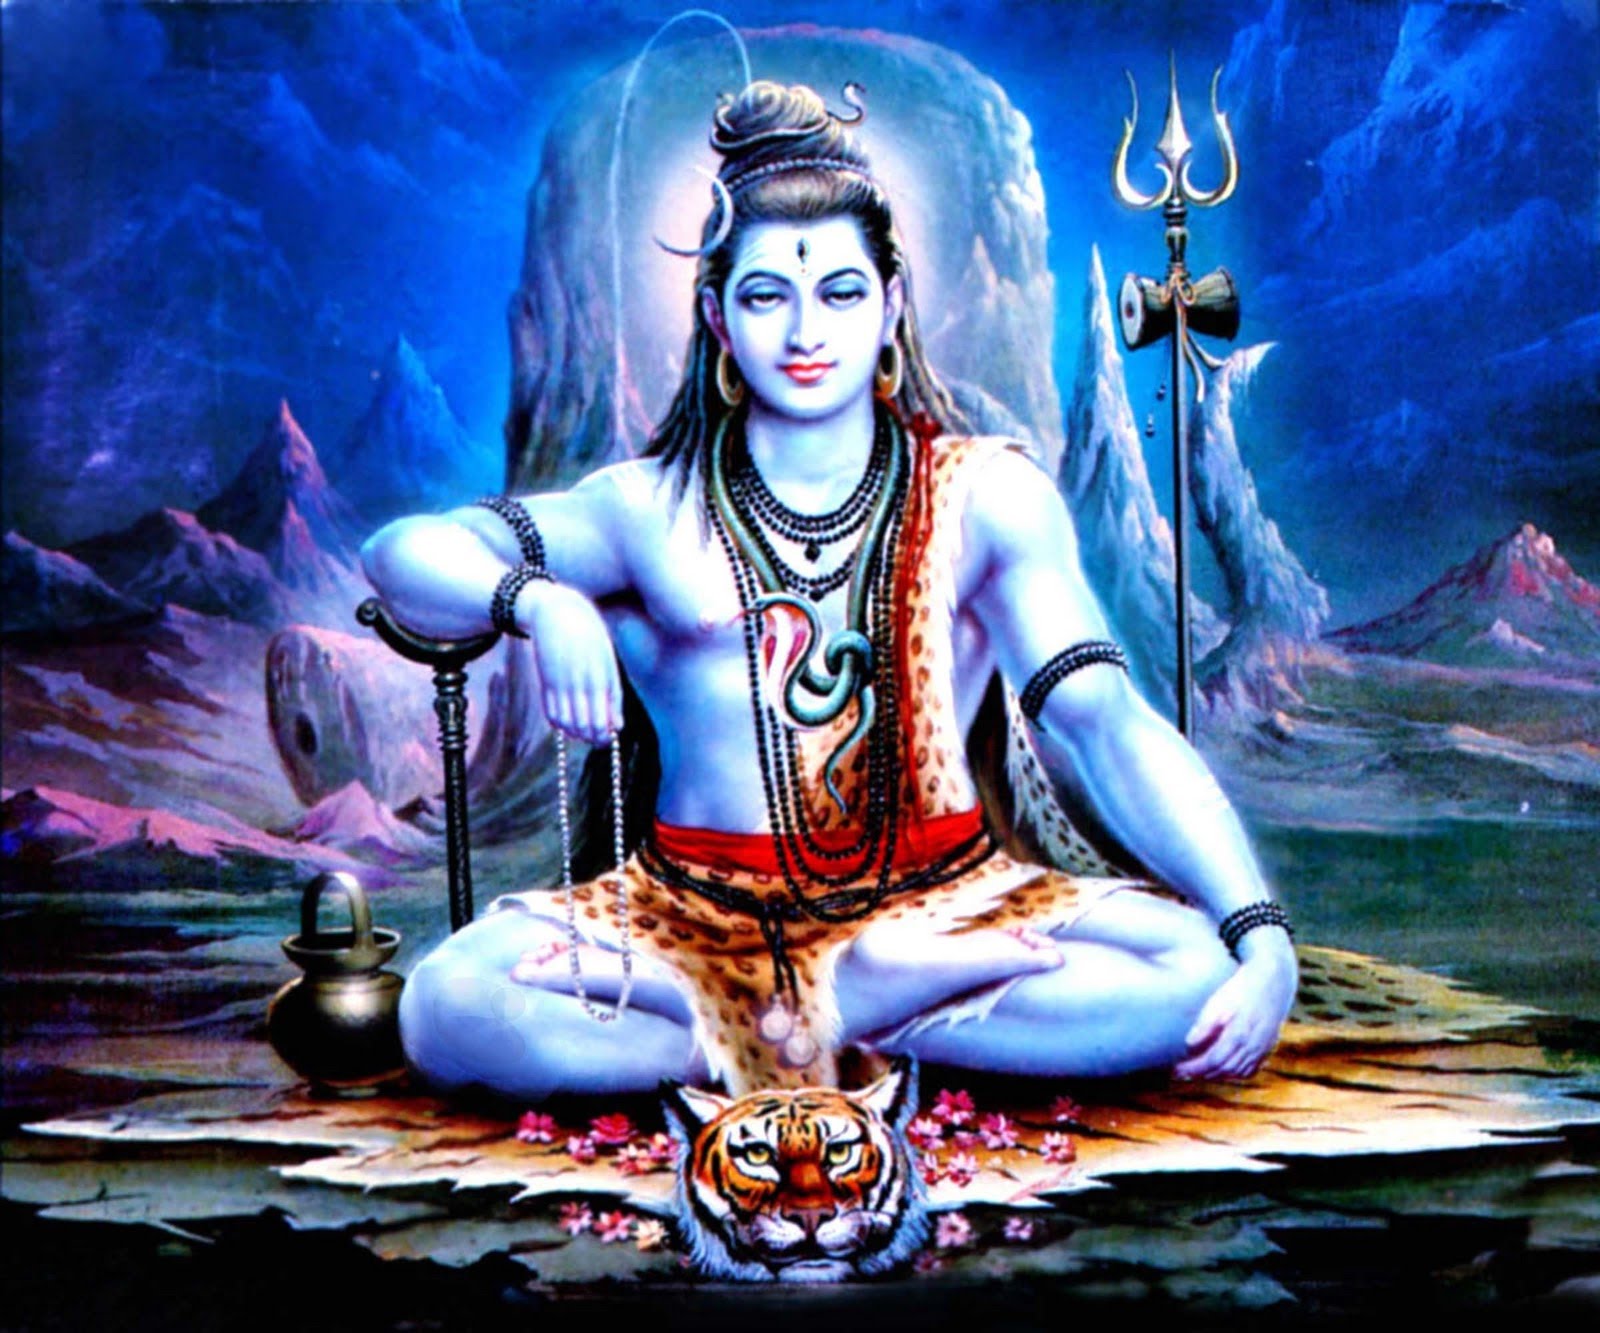 Festival of Mahashivratri & its Significance in Hinduism